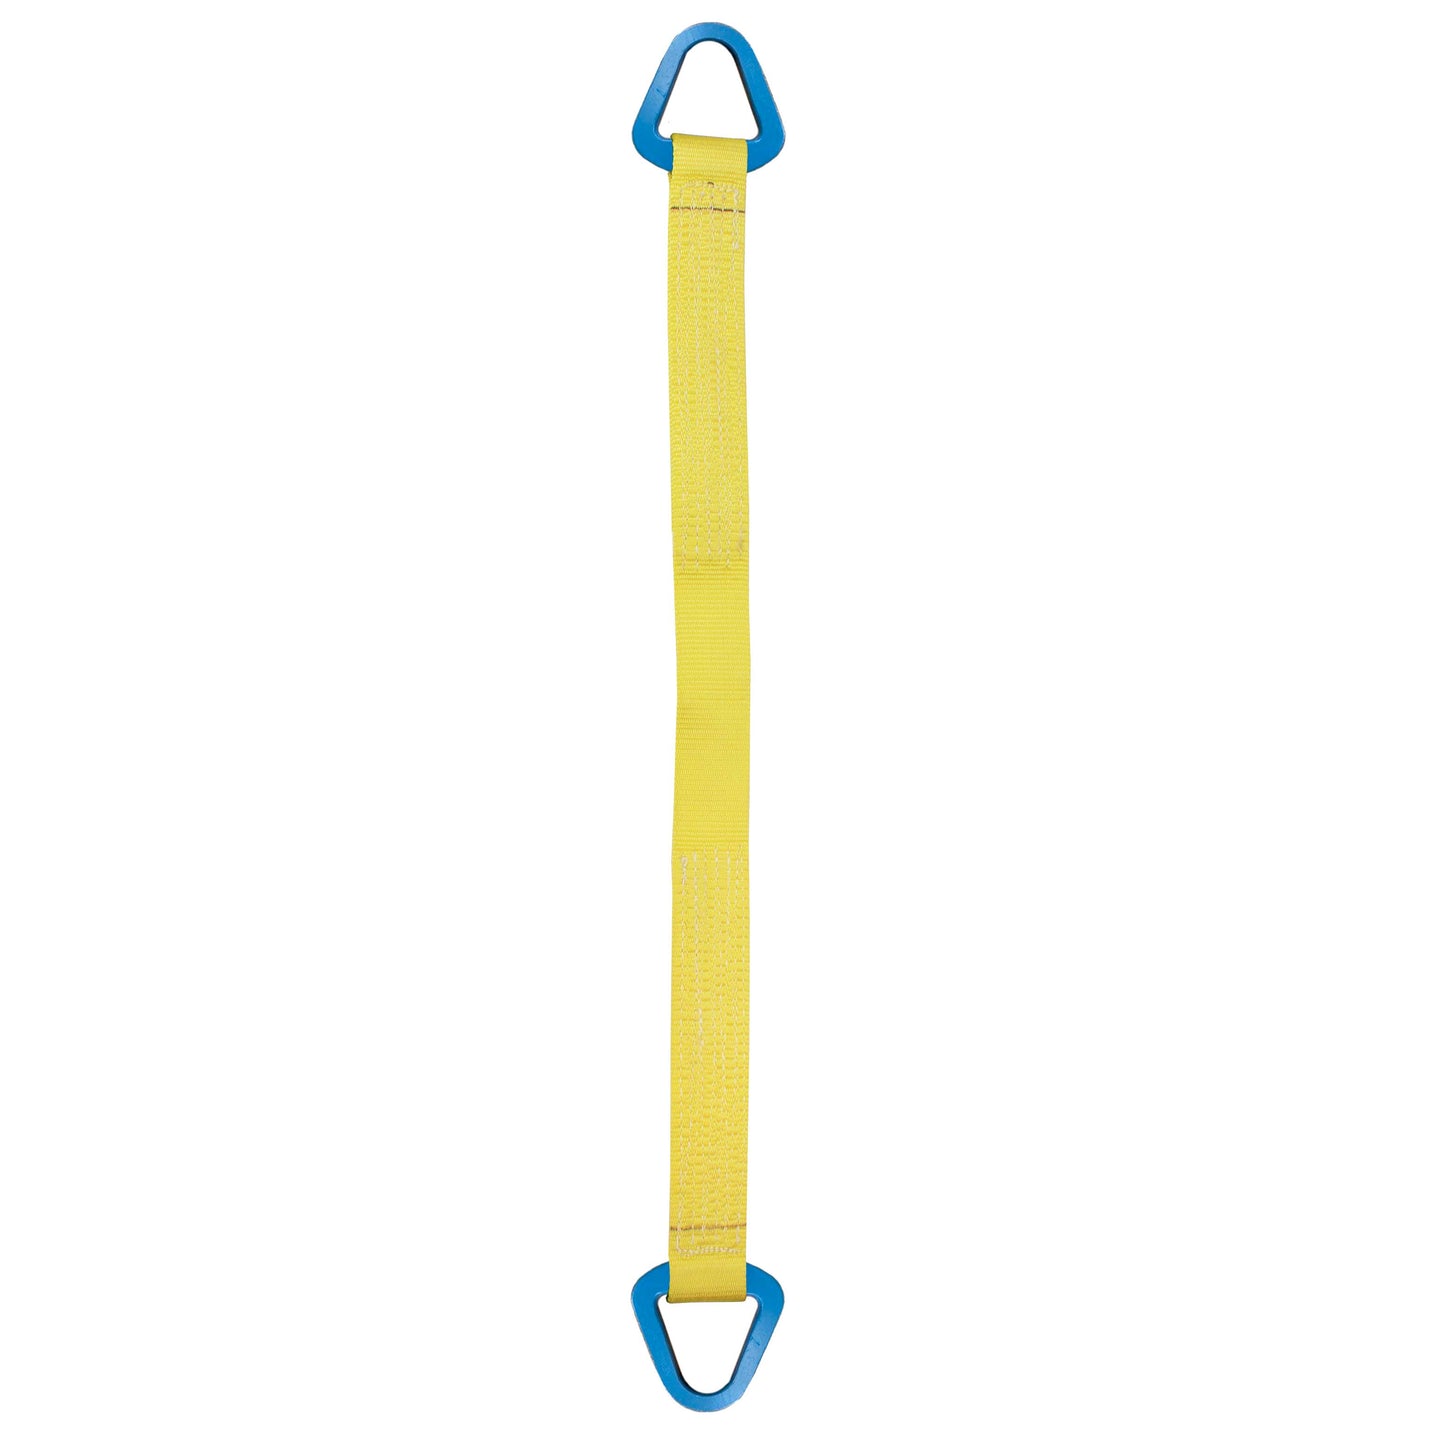 Nylon Lifting Sling Triangle 2 inch x 10 foot 1ply image 1 of 2